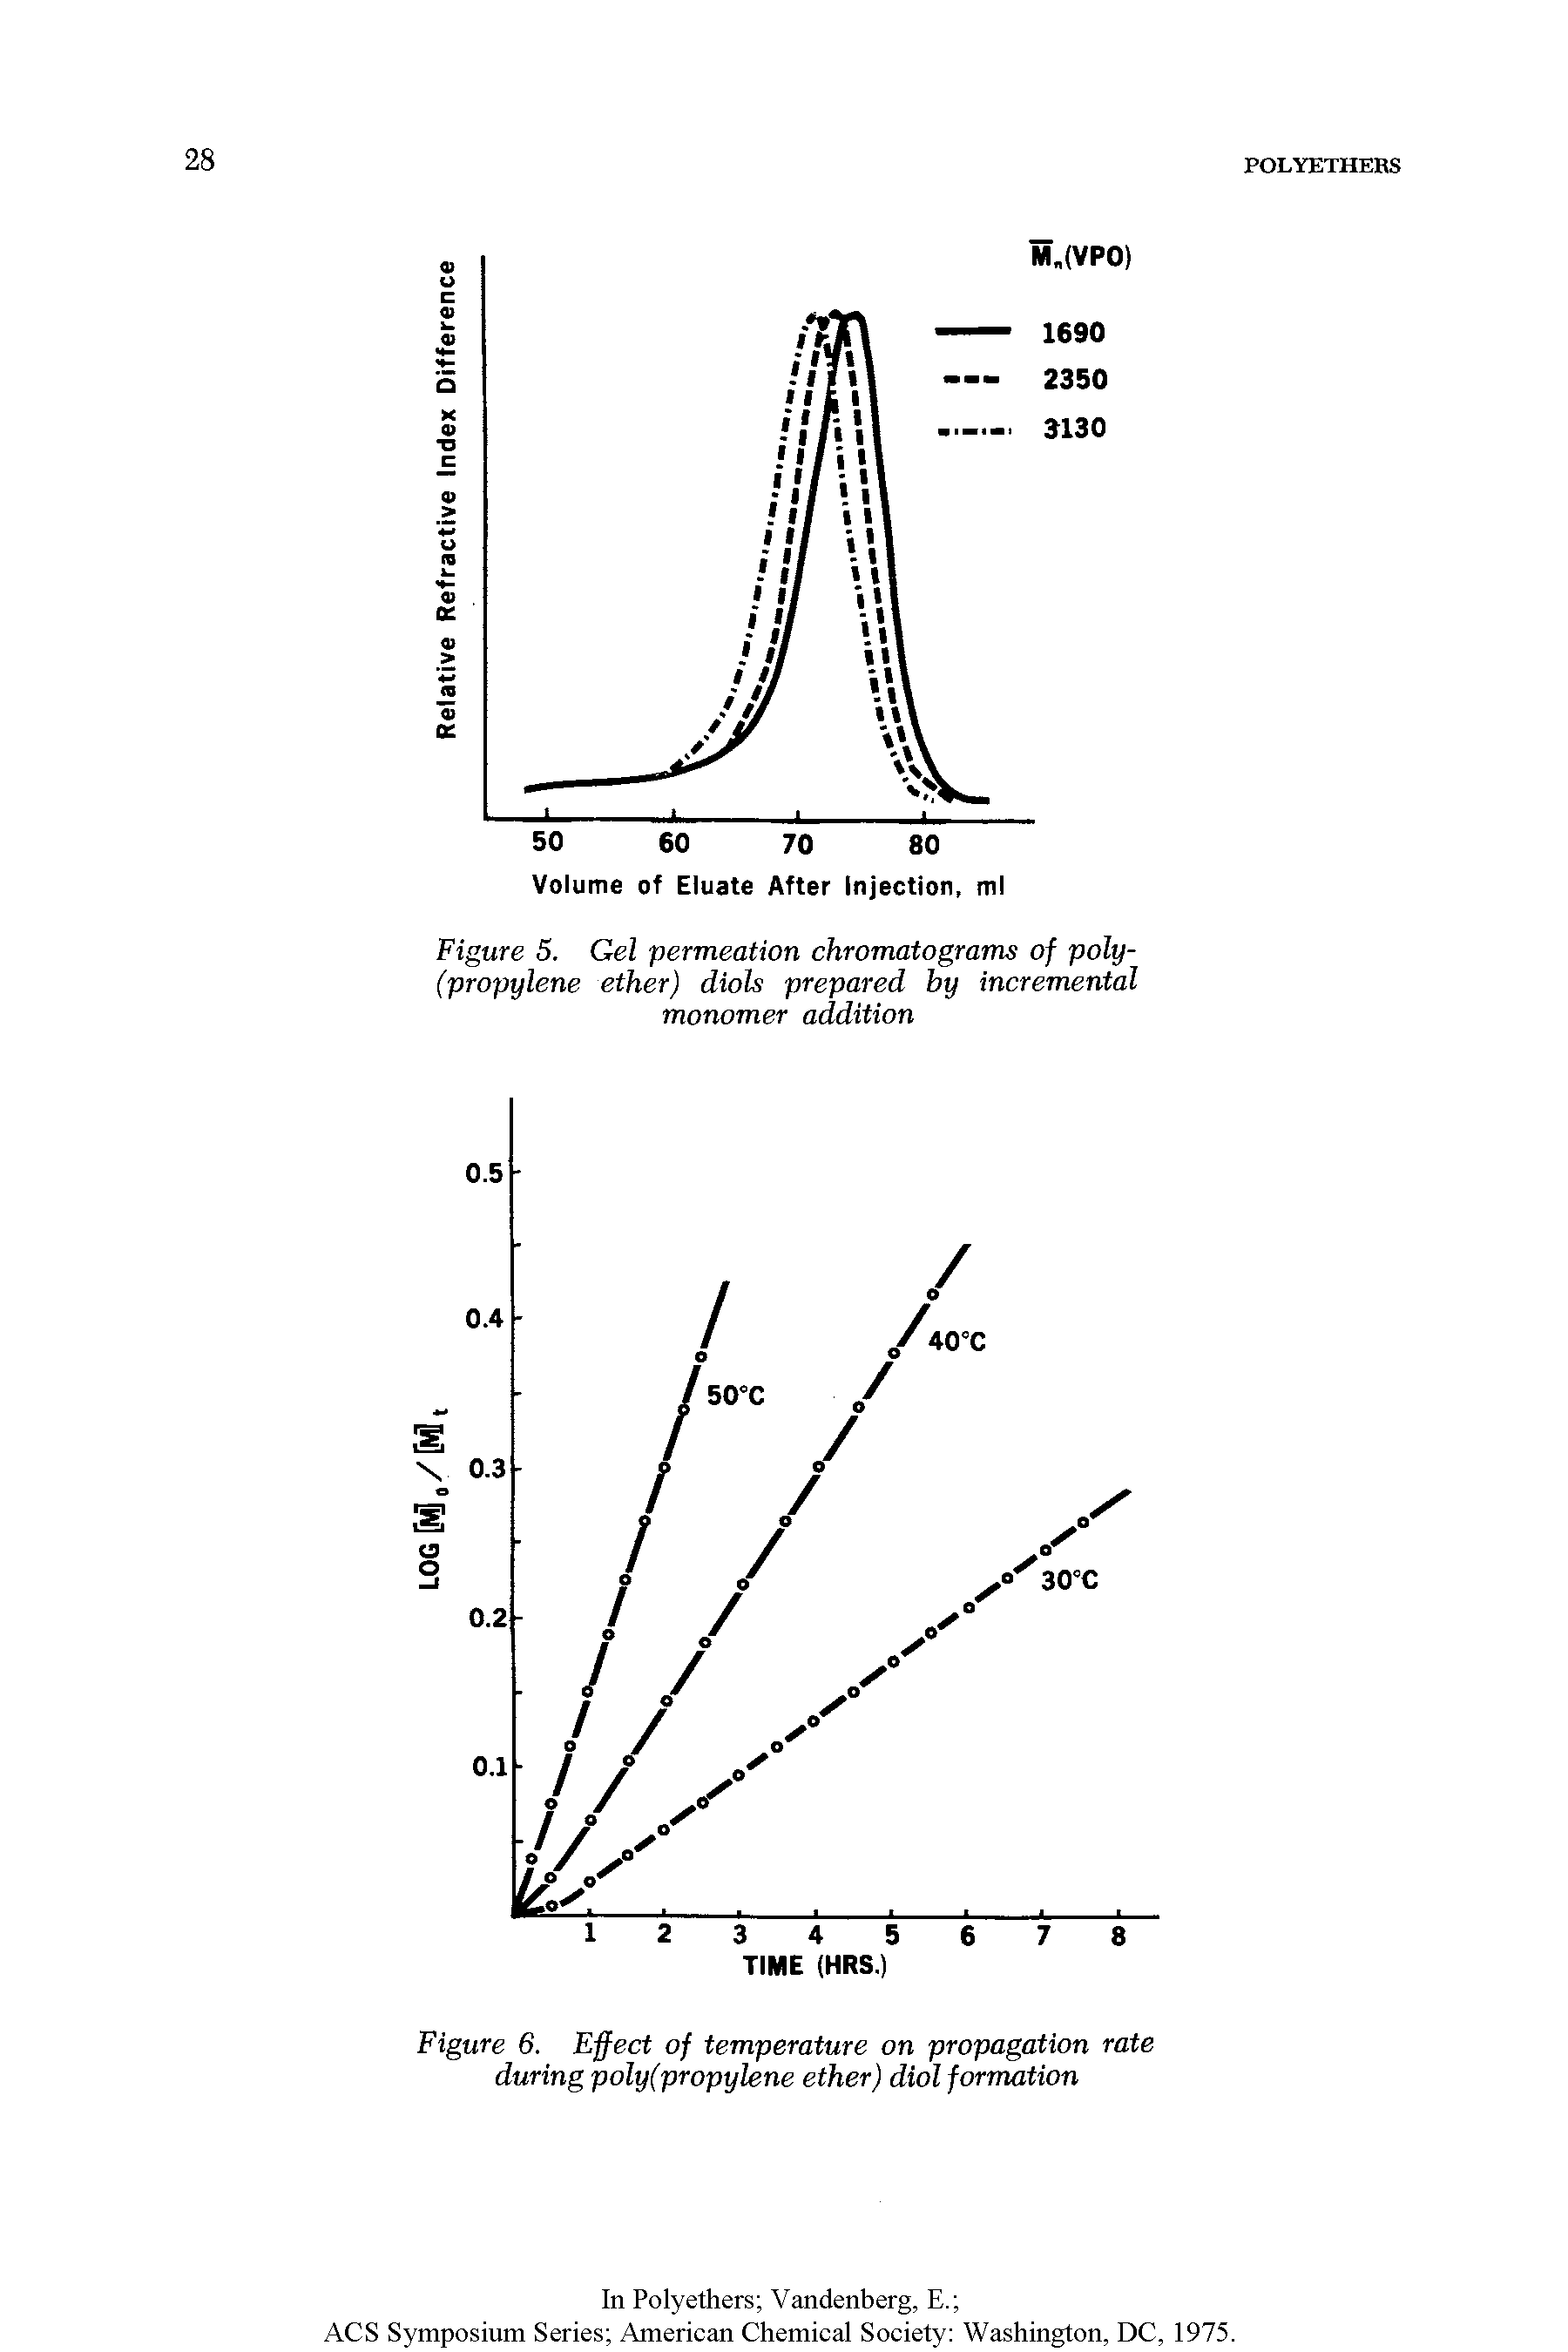 Figure 5. Gel permeation chromatograms of poly-(propylene ether) dials prepared by incremental monomer addition...